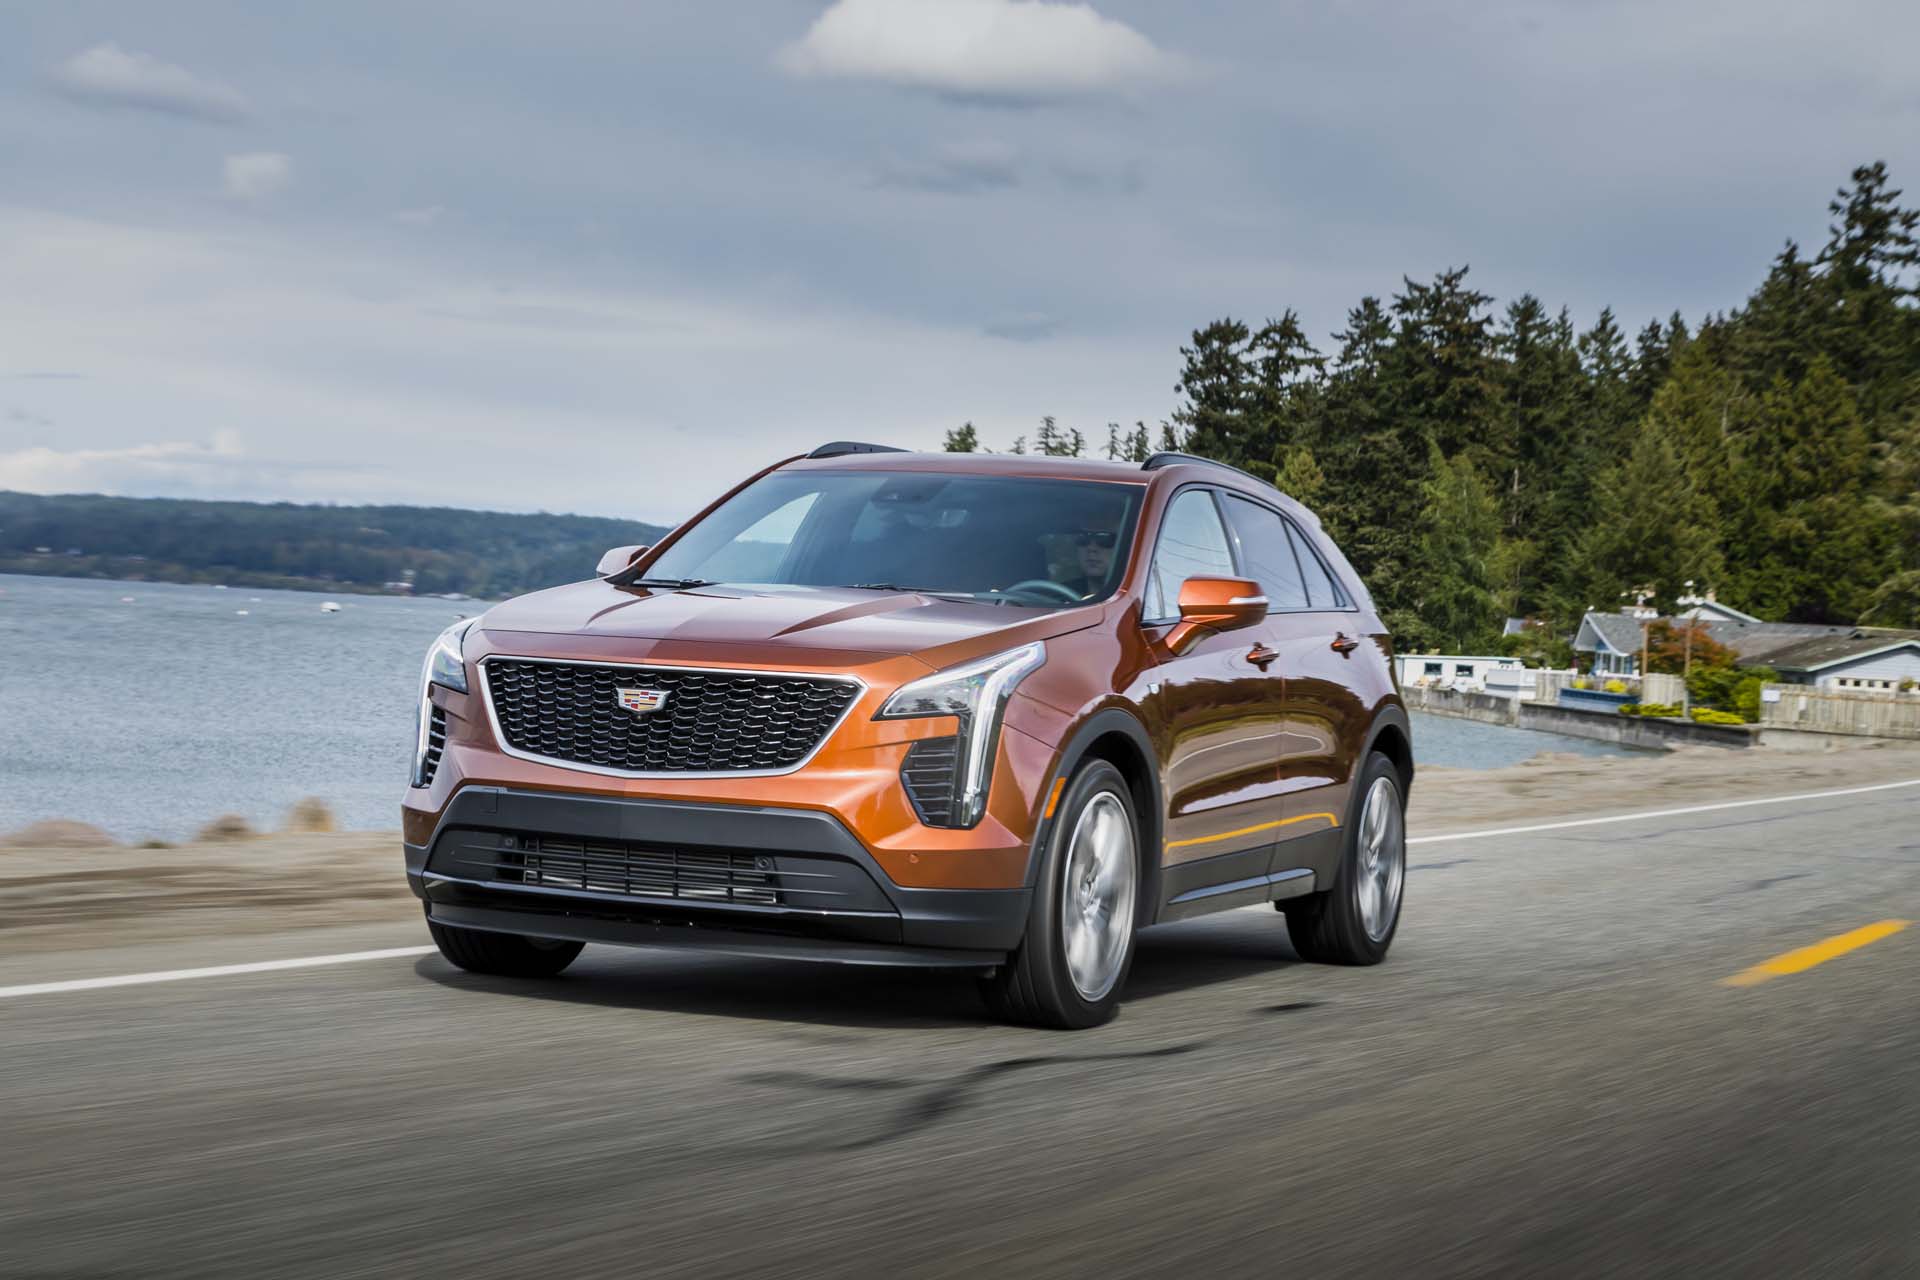 19 Cadillac Xt4 First Drive Review Luxury Crossover Suv Finally Shows Up Shows Off